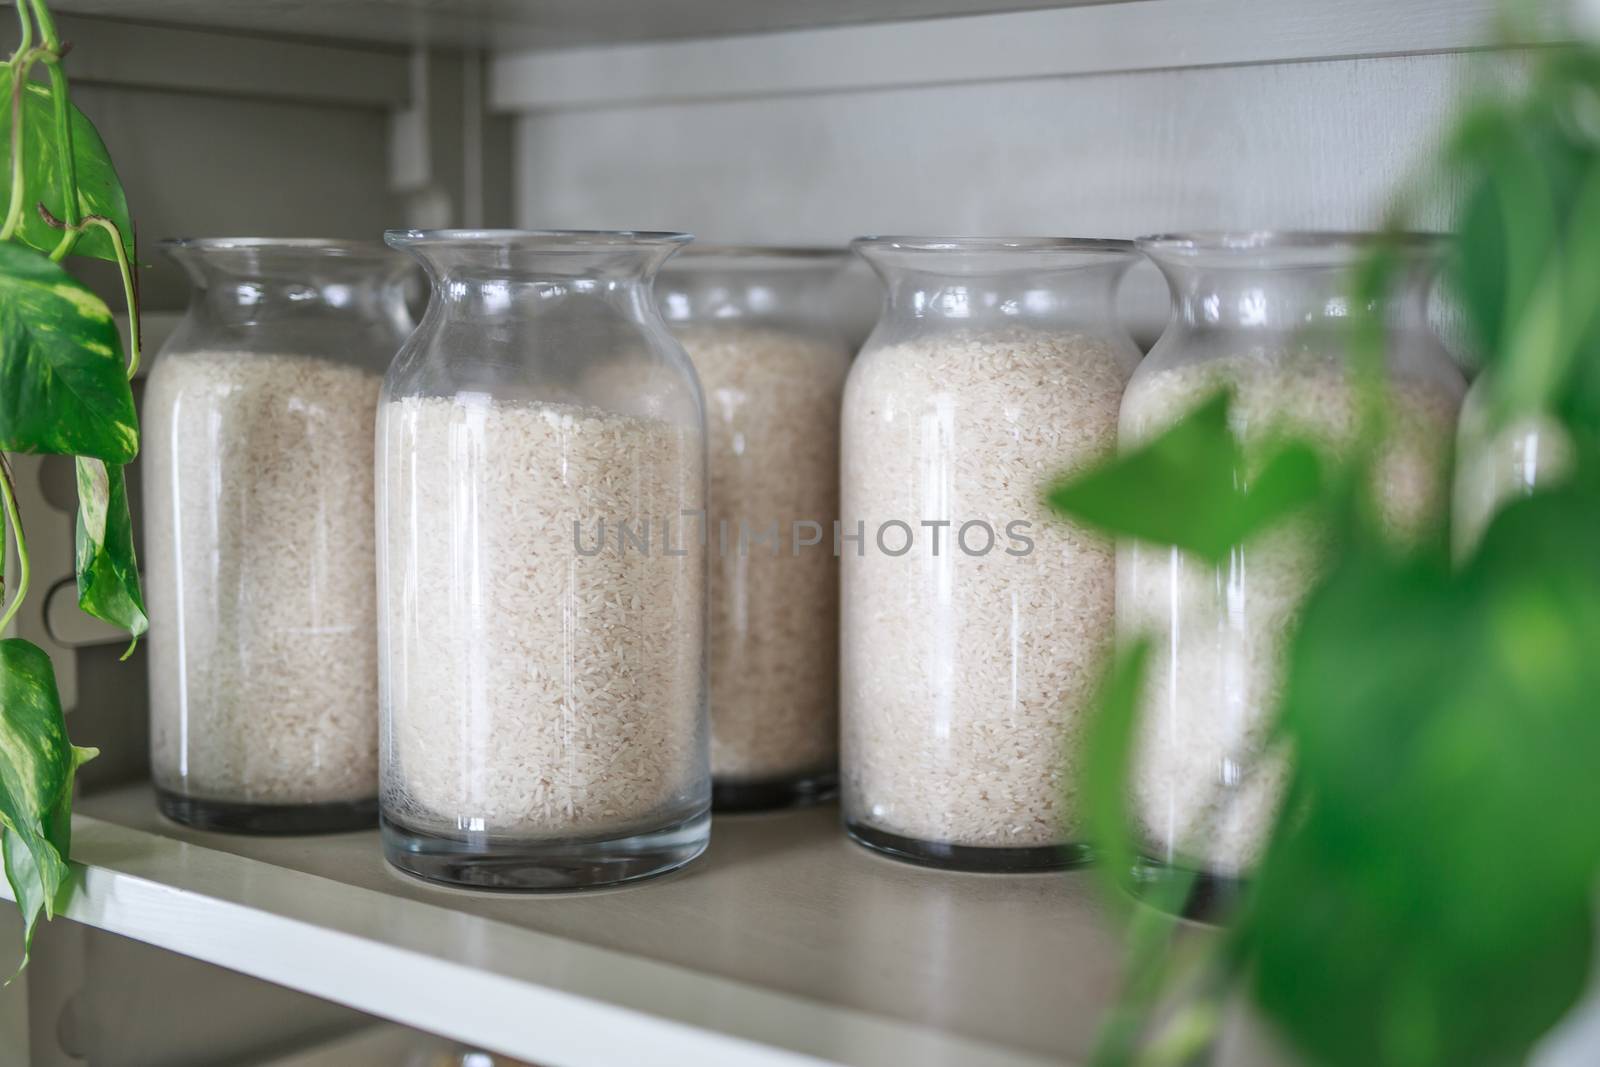 white rice in glass jars on wooden shelves in a light vintage Cabinet, green vines and plants hanging on the sides